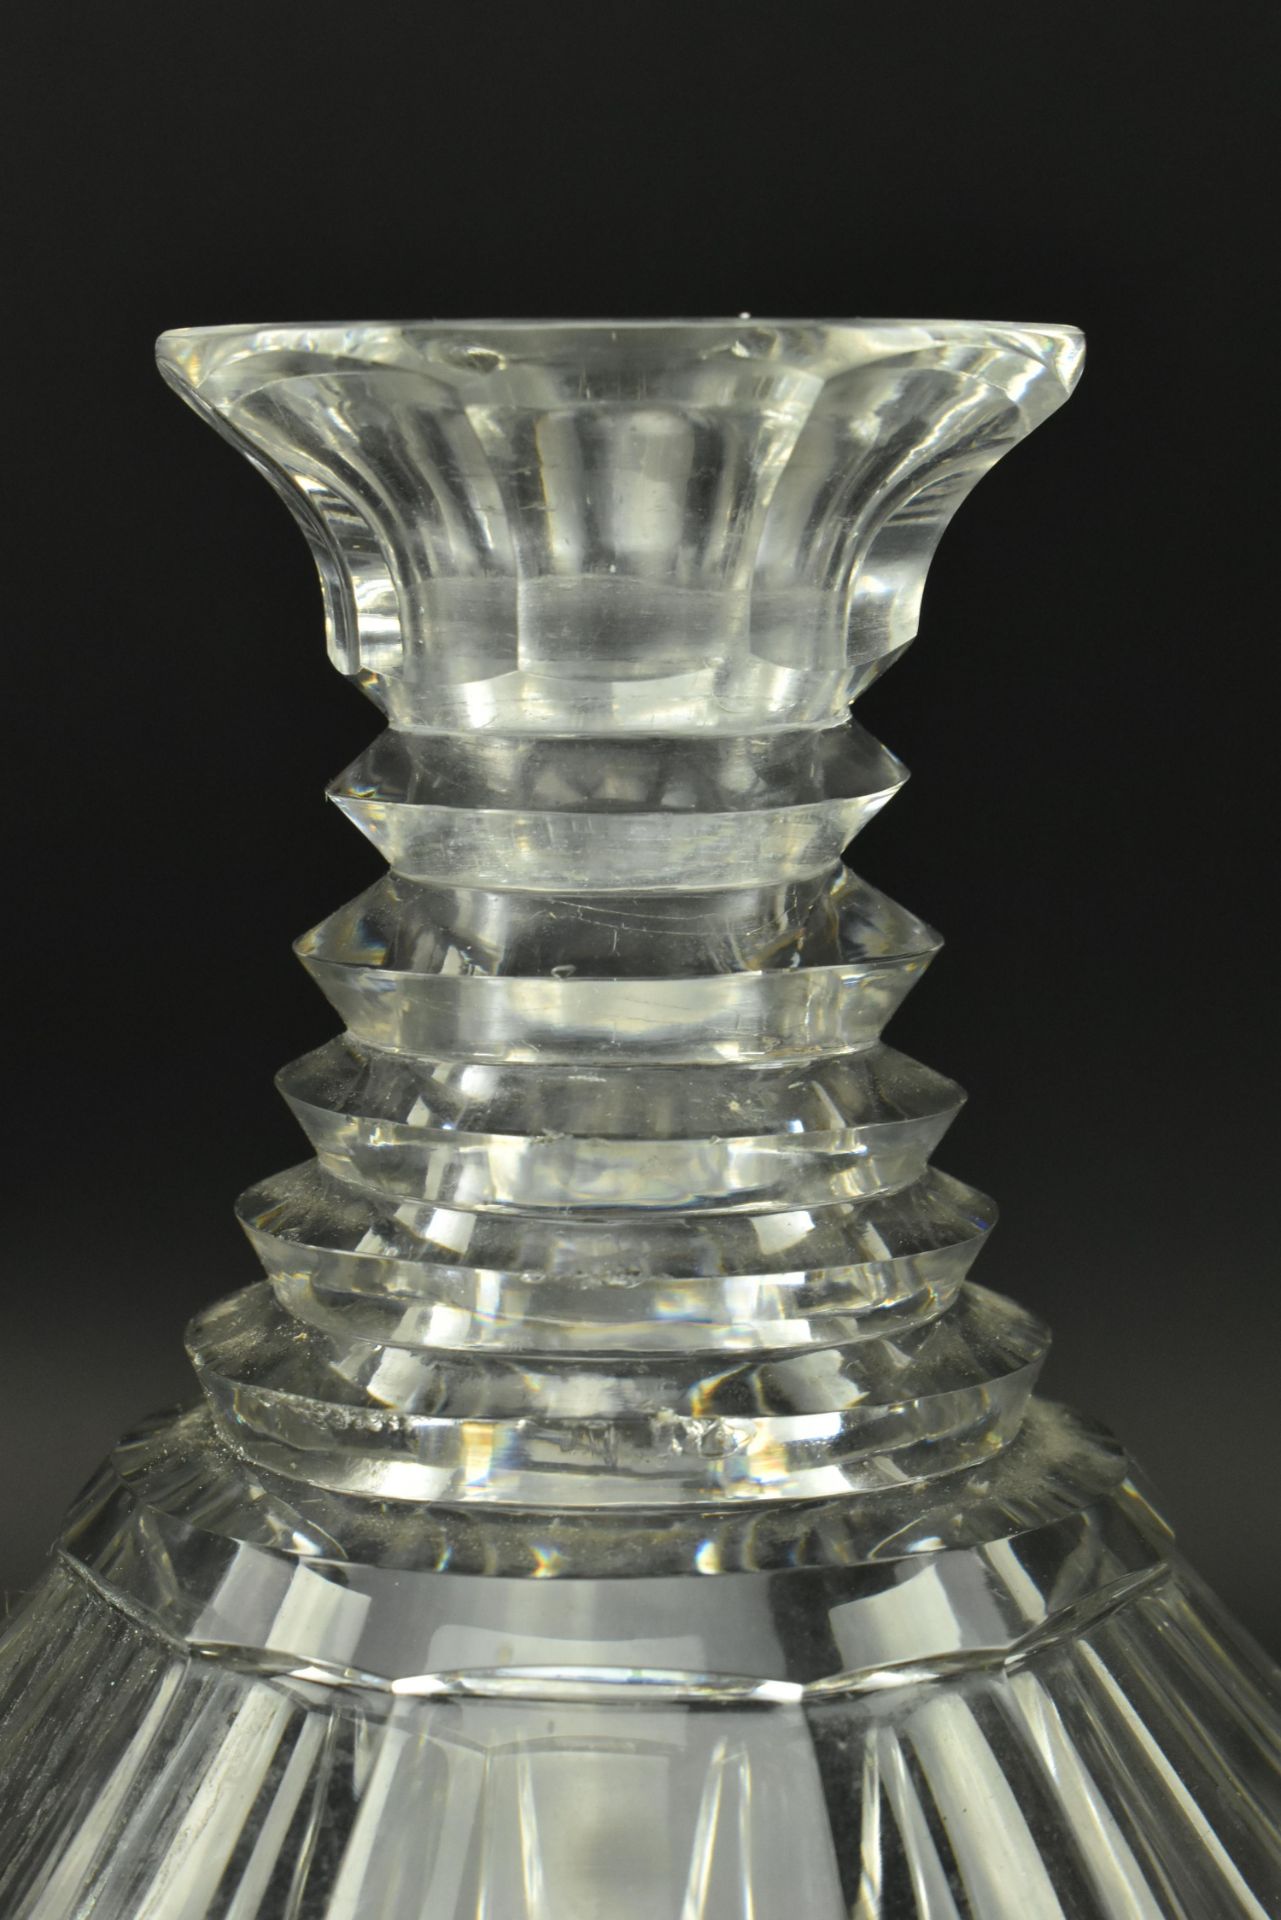 EARLY 19TH CENTURY HEAVY GLASS DECANTER, HOLLOW STOPPER - Image 5 of 8